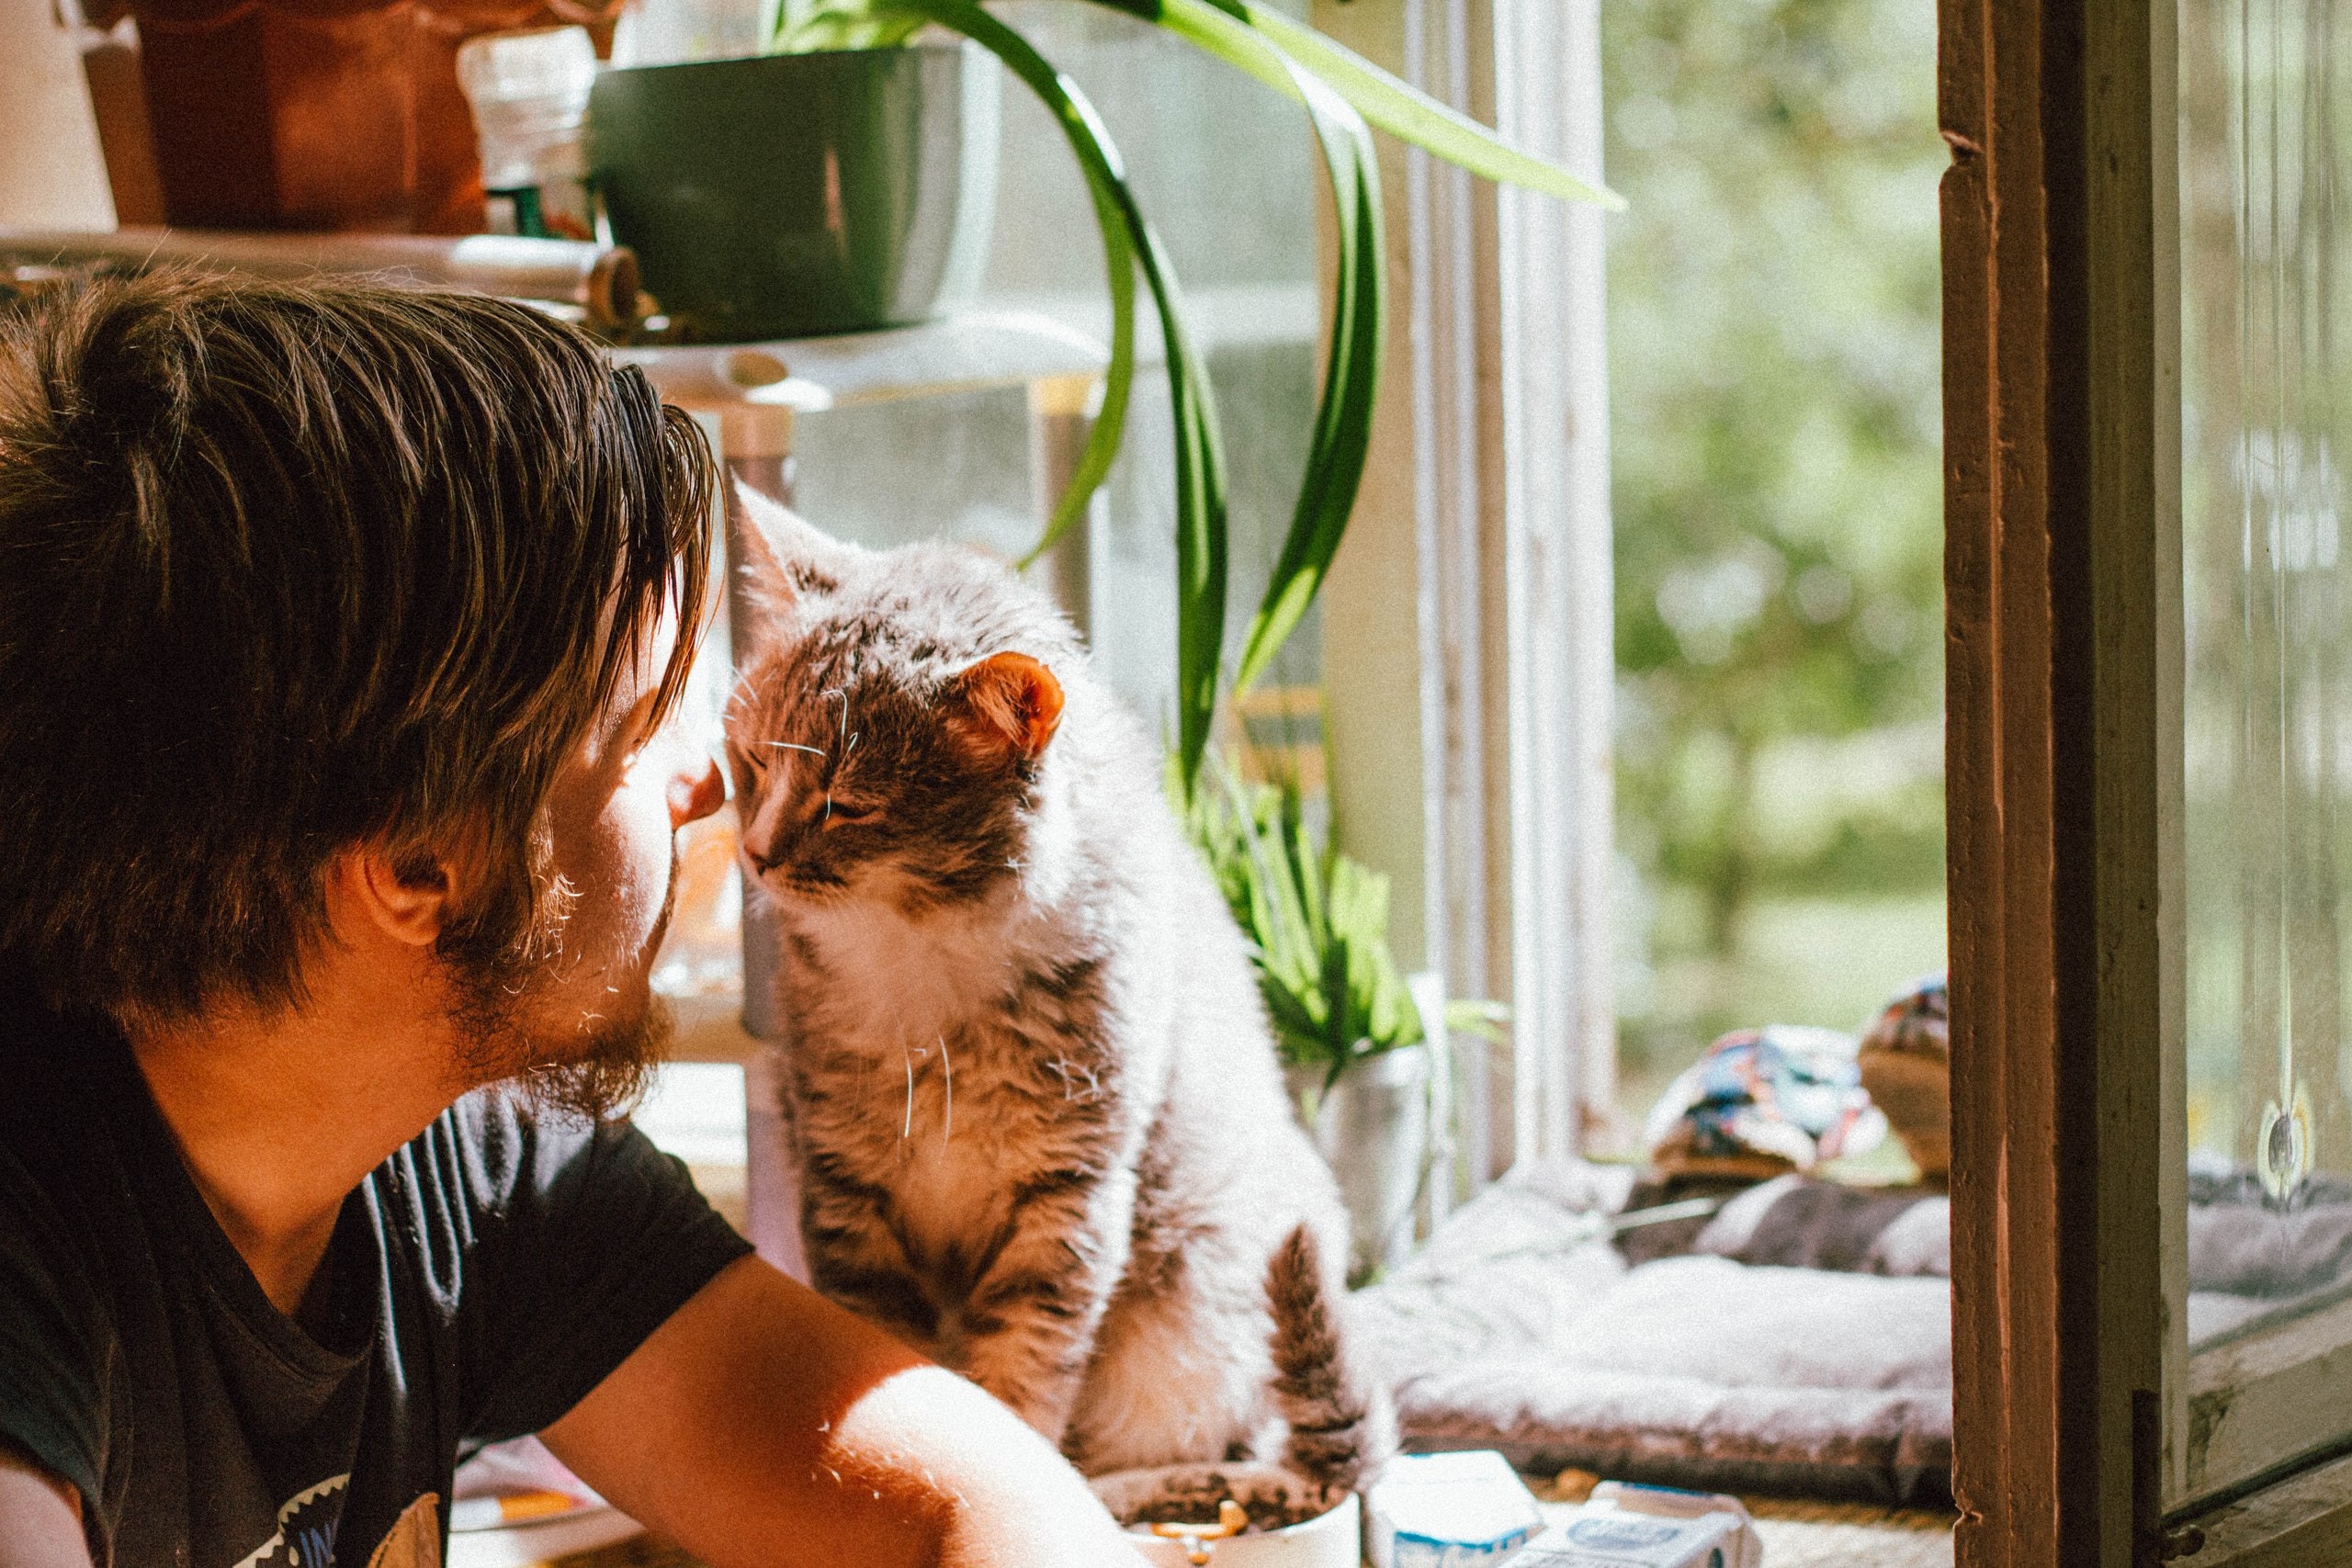 A man sitting with his cat, looking out the window